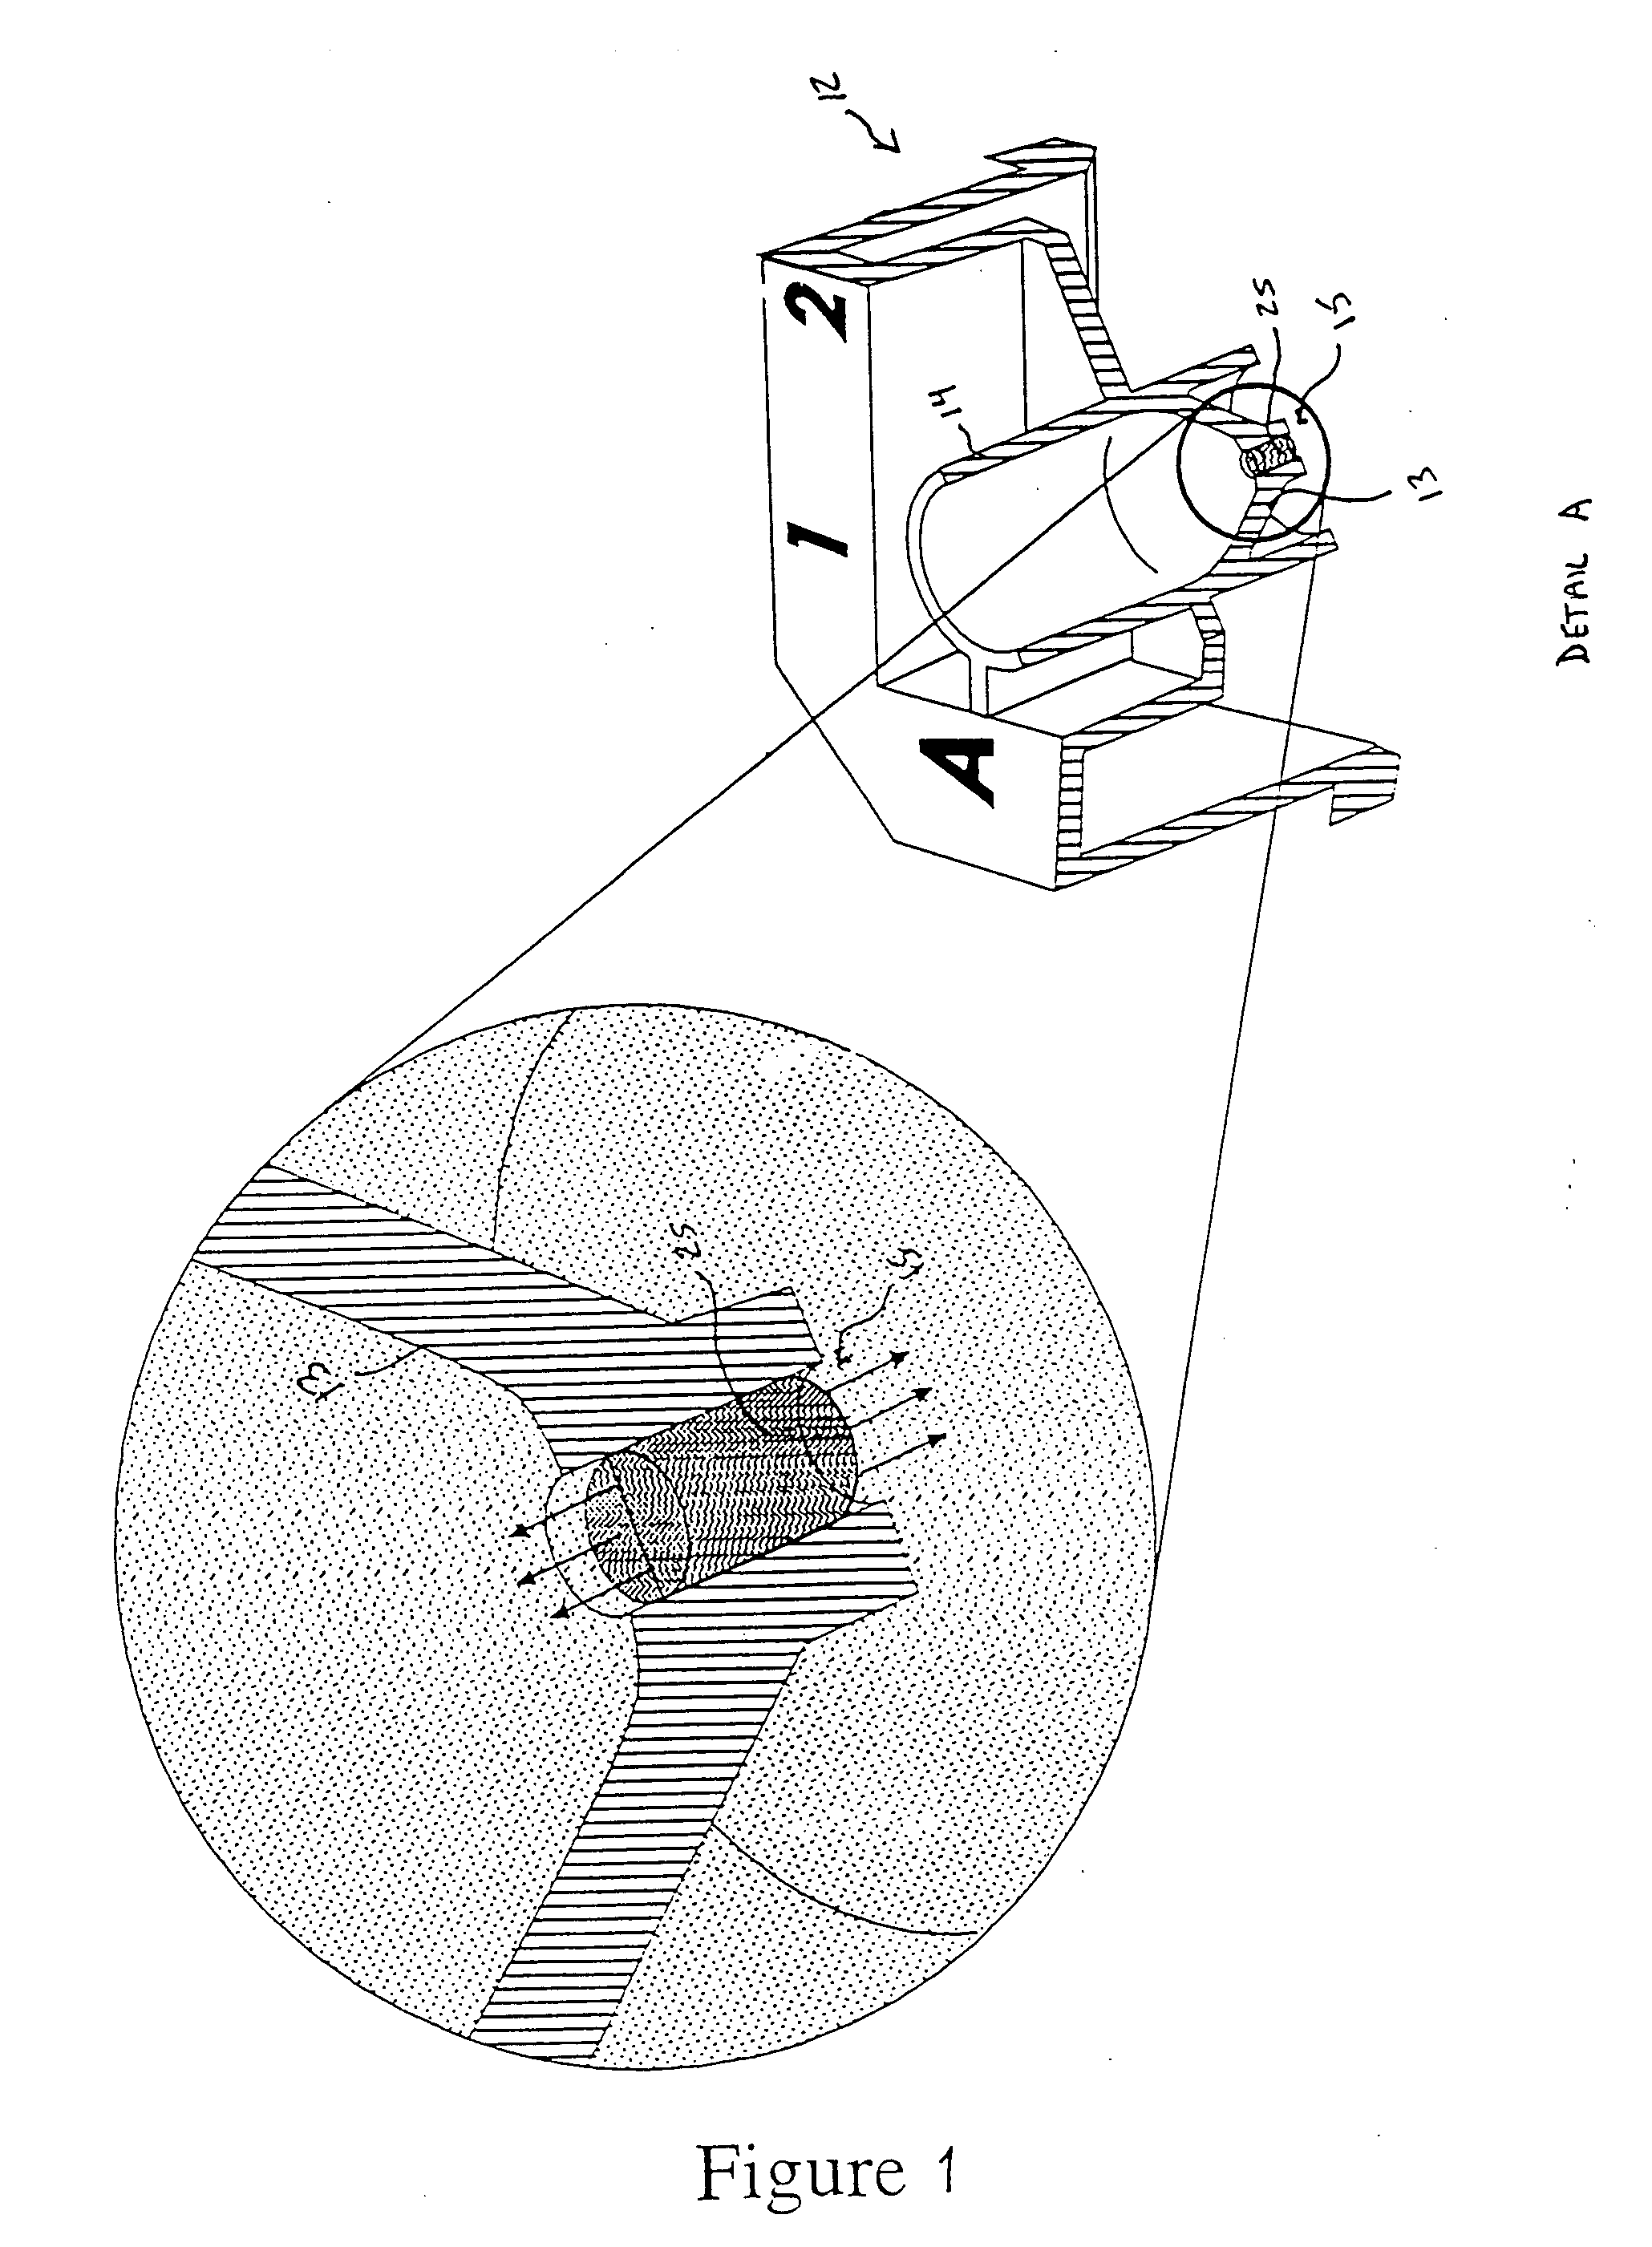 Apparatus and method for sample preparation and direct spotting eluants onto a MALDI-TOF target